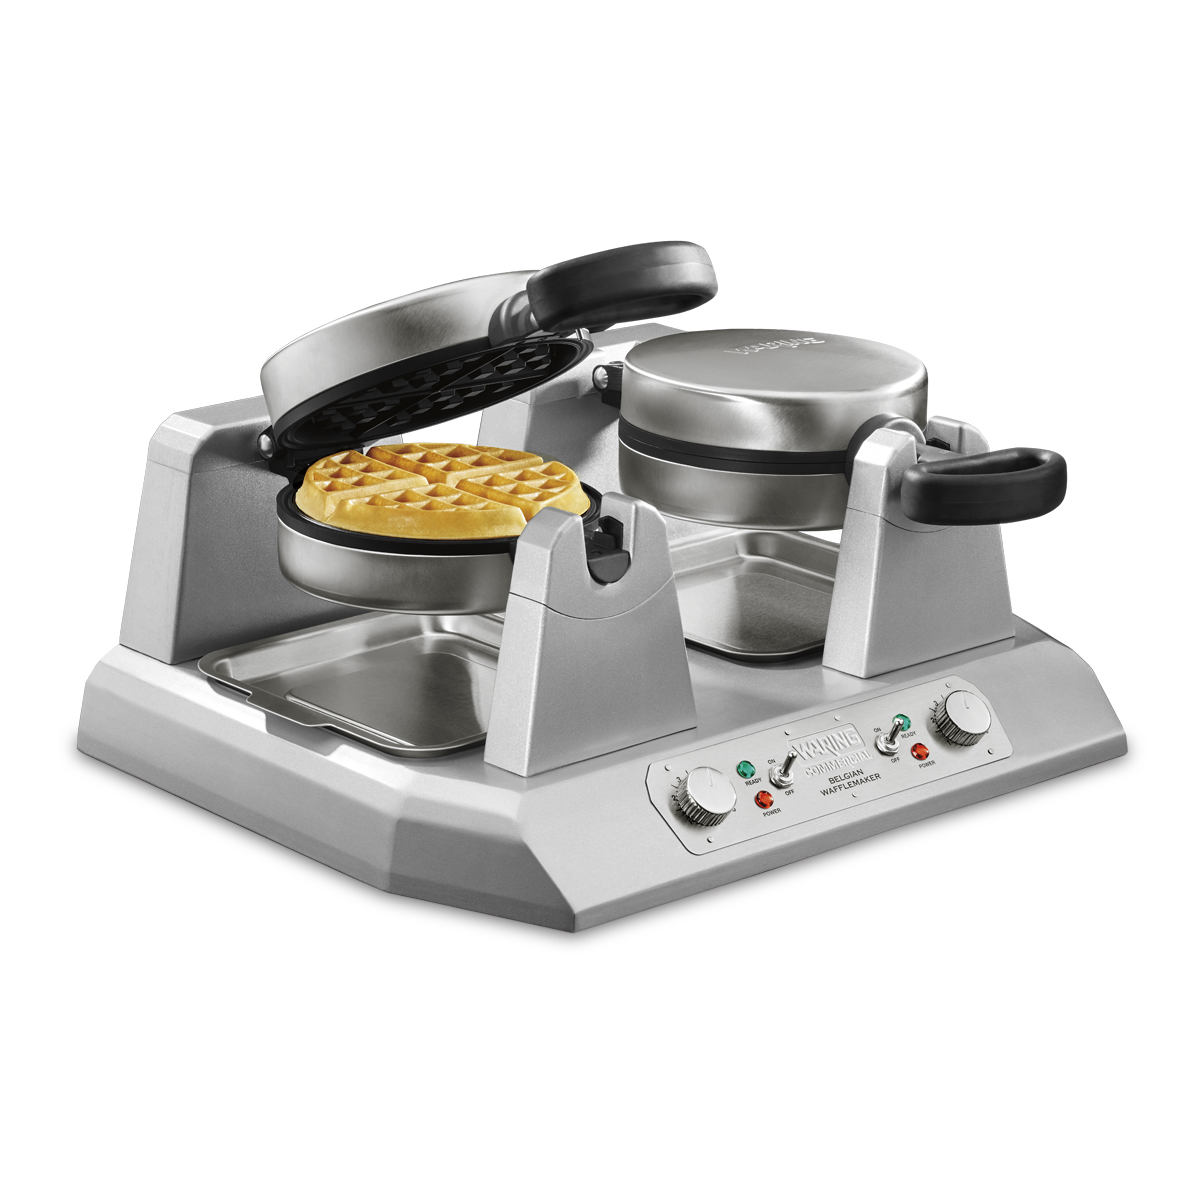 https://www.waringcommercialproducts.com/files/products/ww250x-waring-side-by-side-belgian-waffle-maker-inset1.jpg